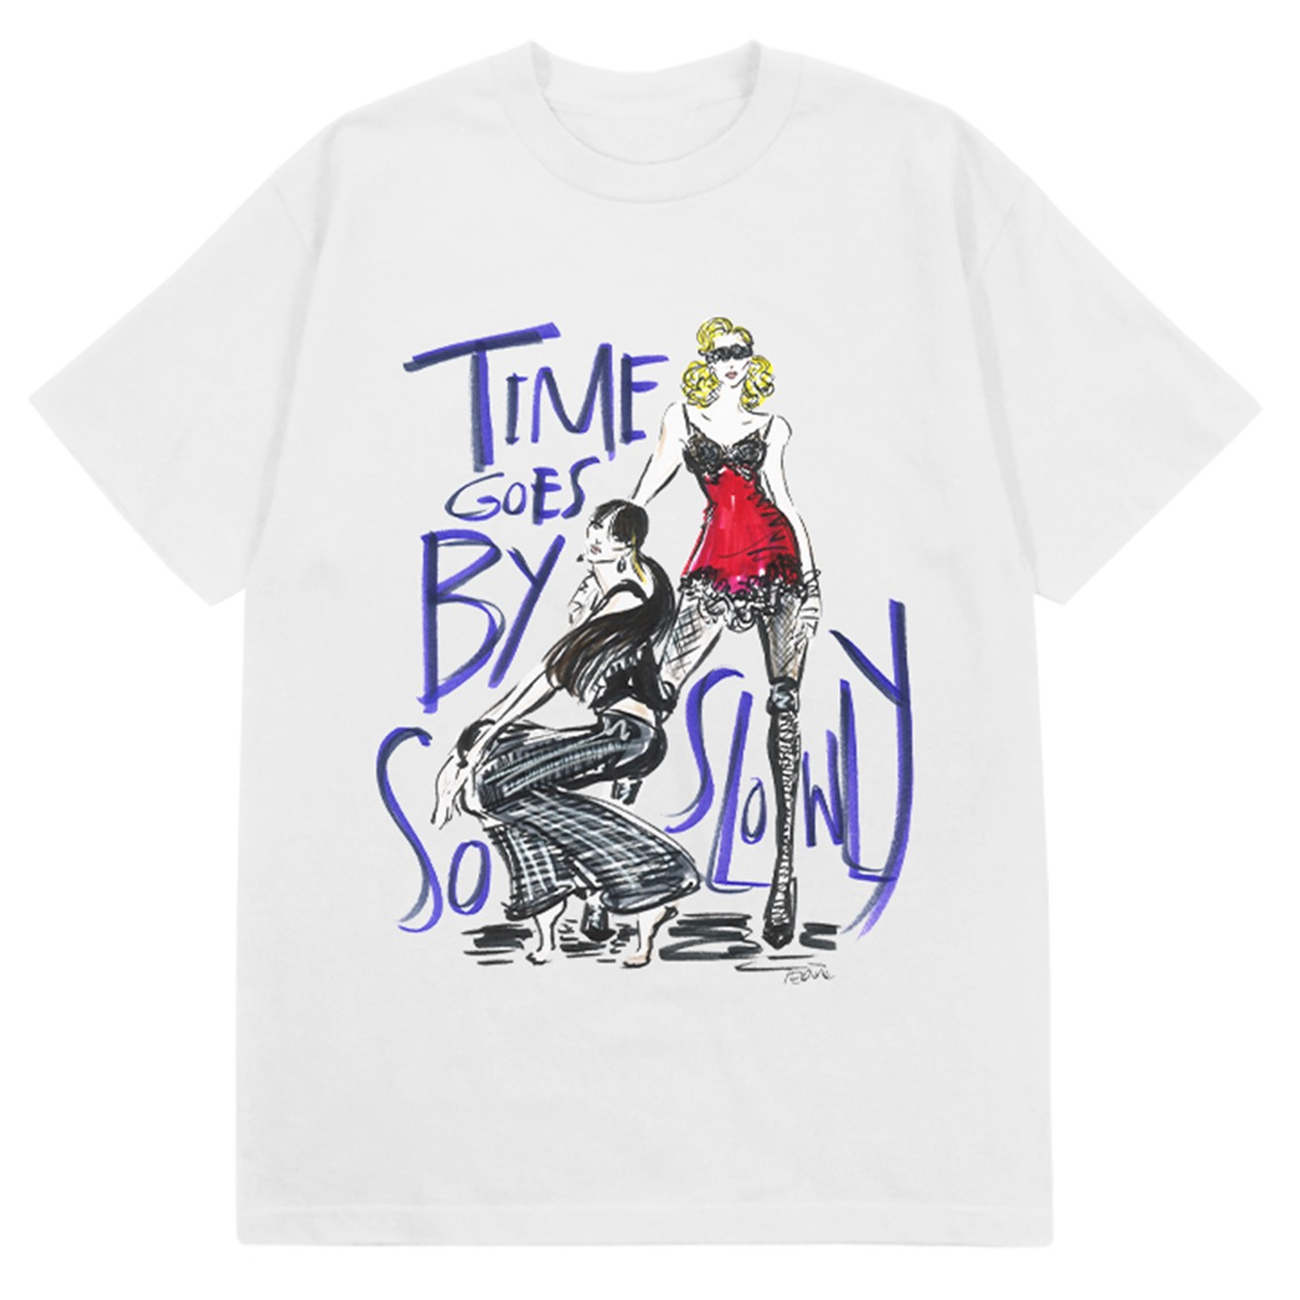 "Time Goes By So Slowly" Tee